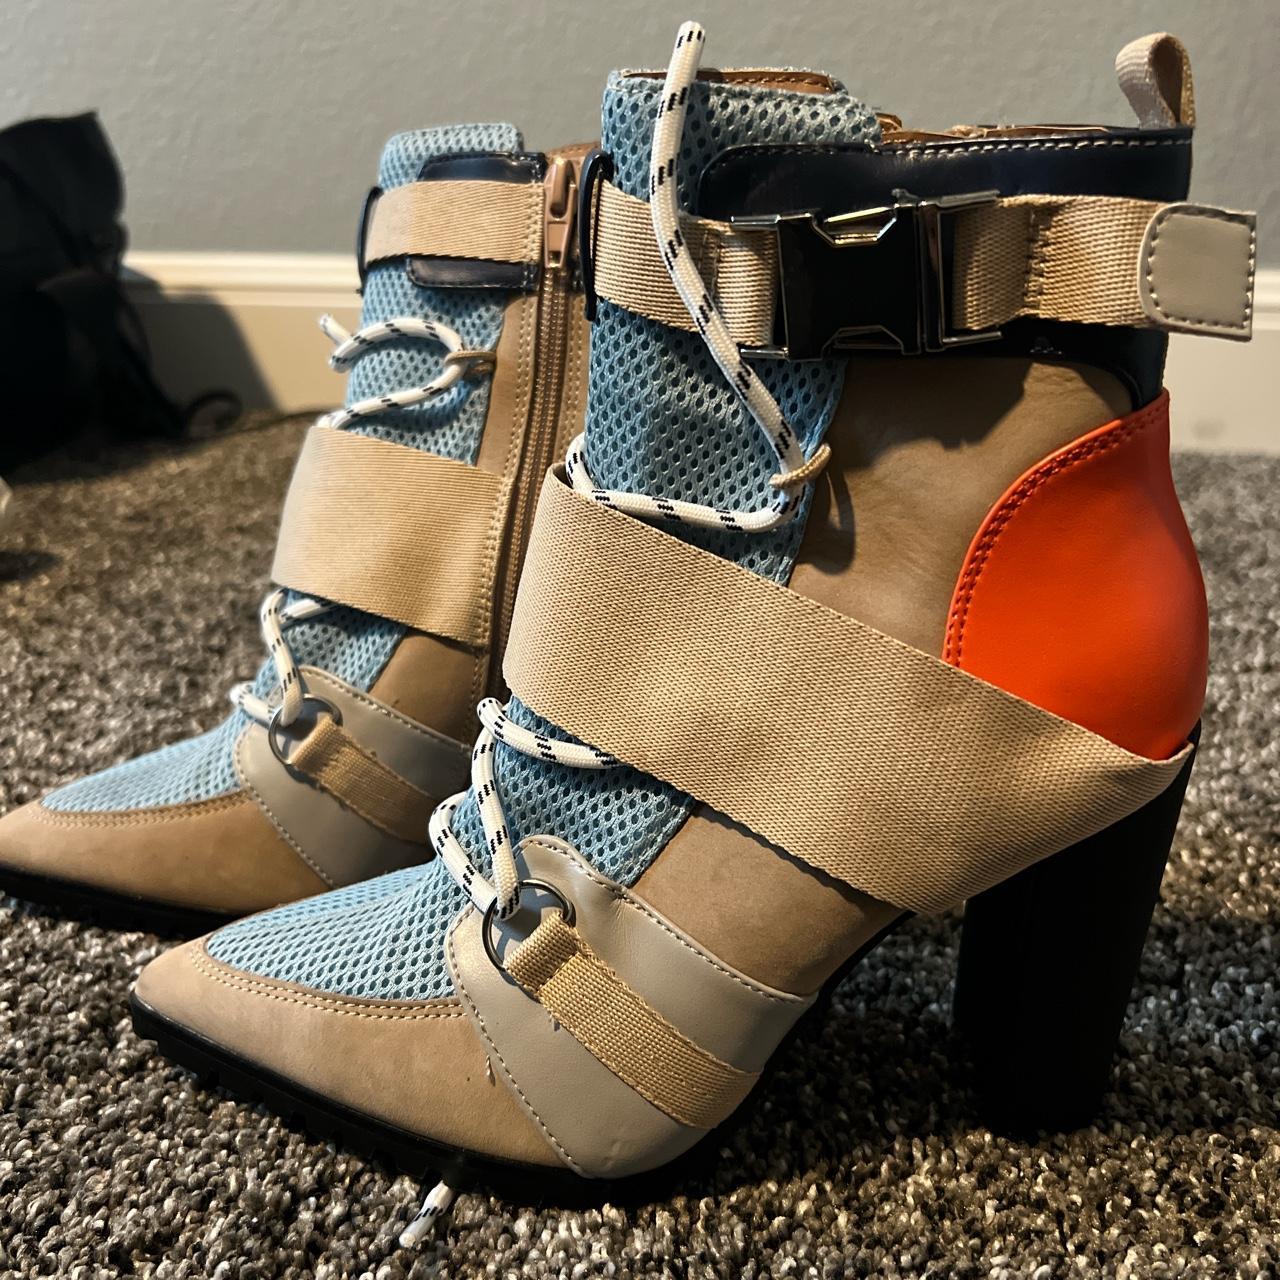 Illusion Ankle Boot - New - For Women